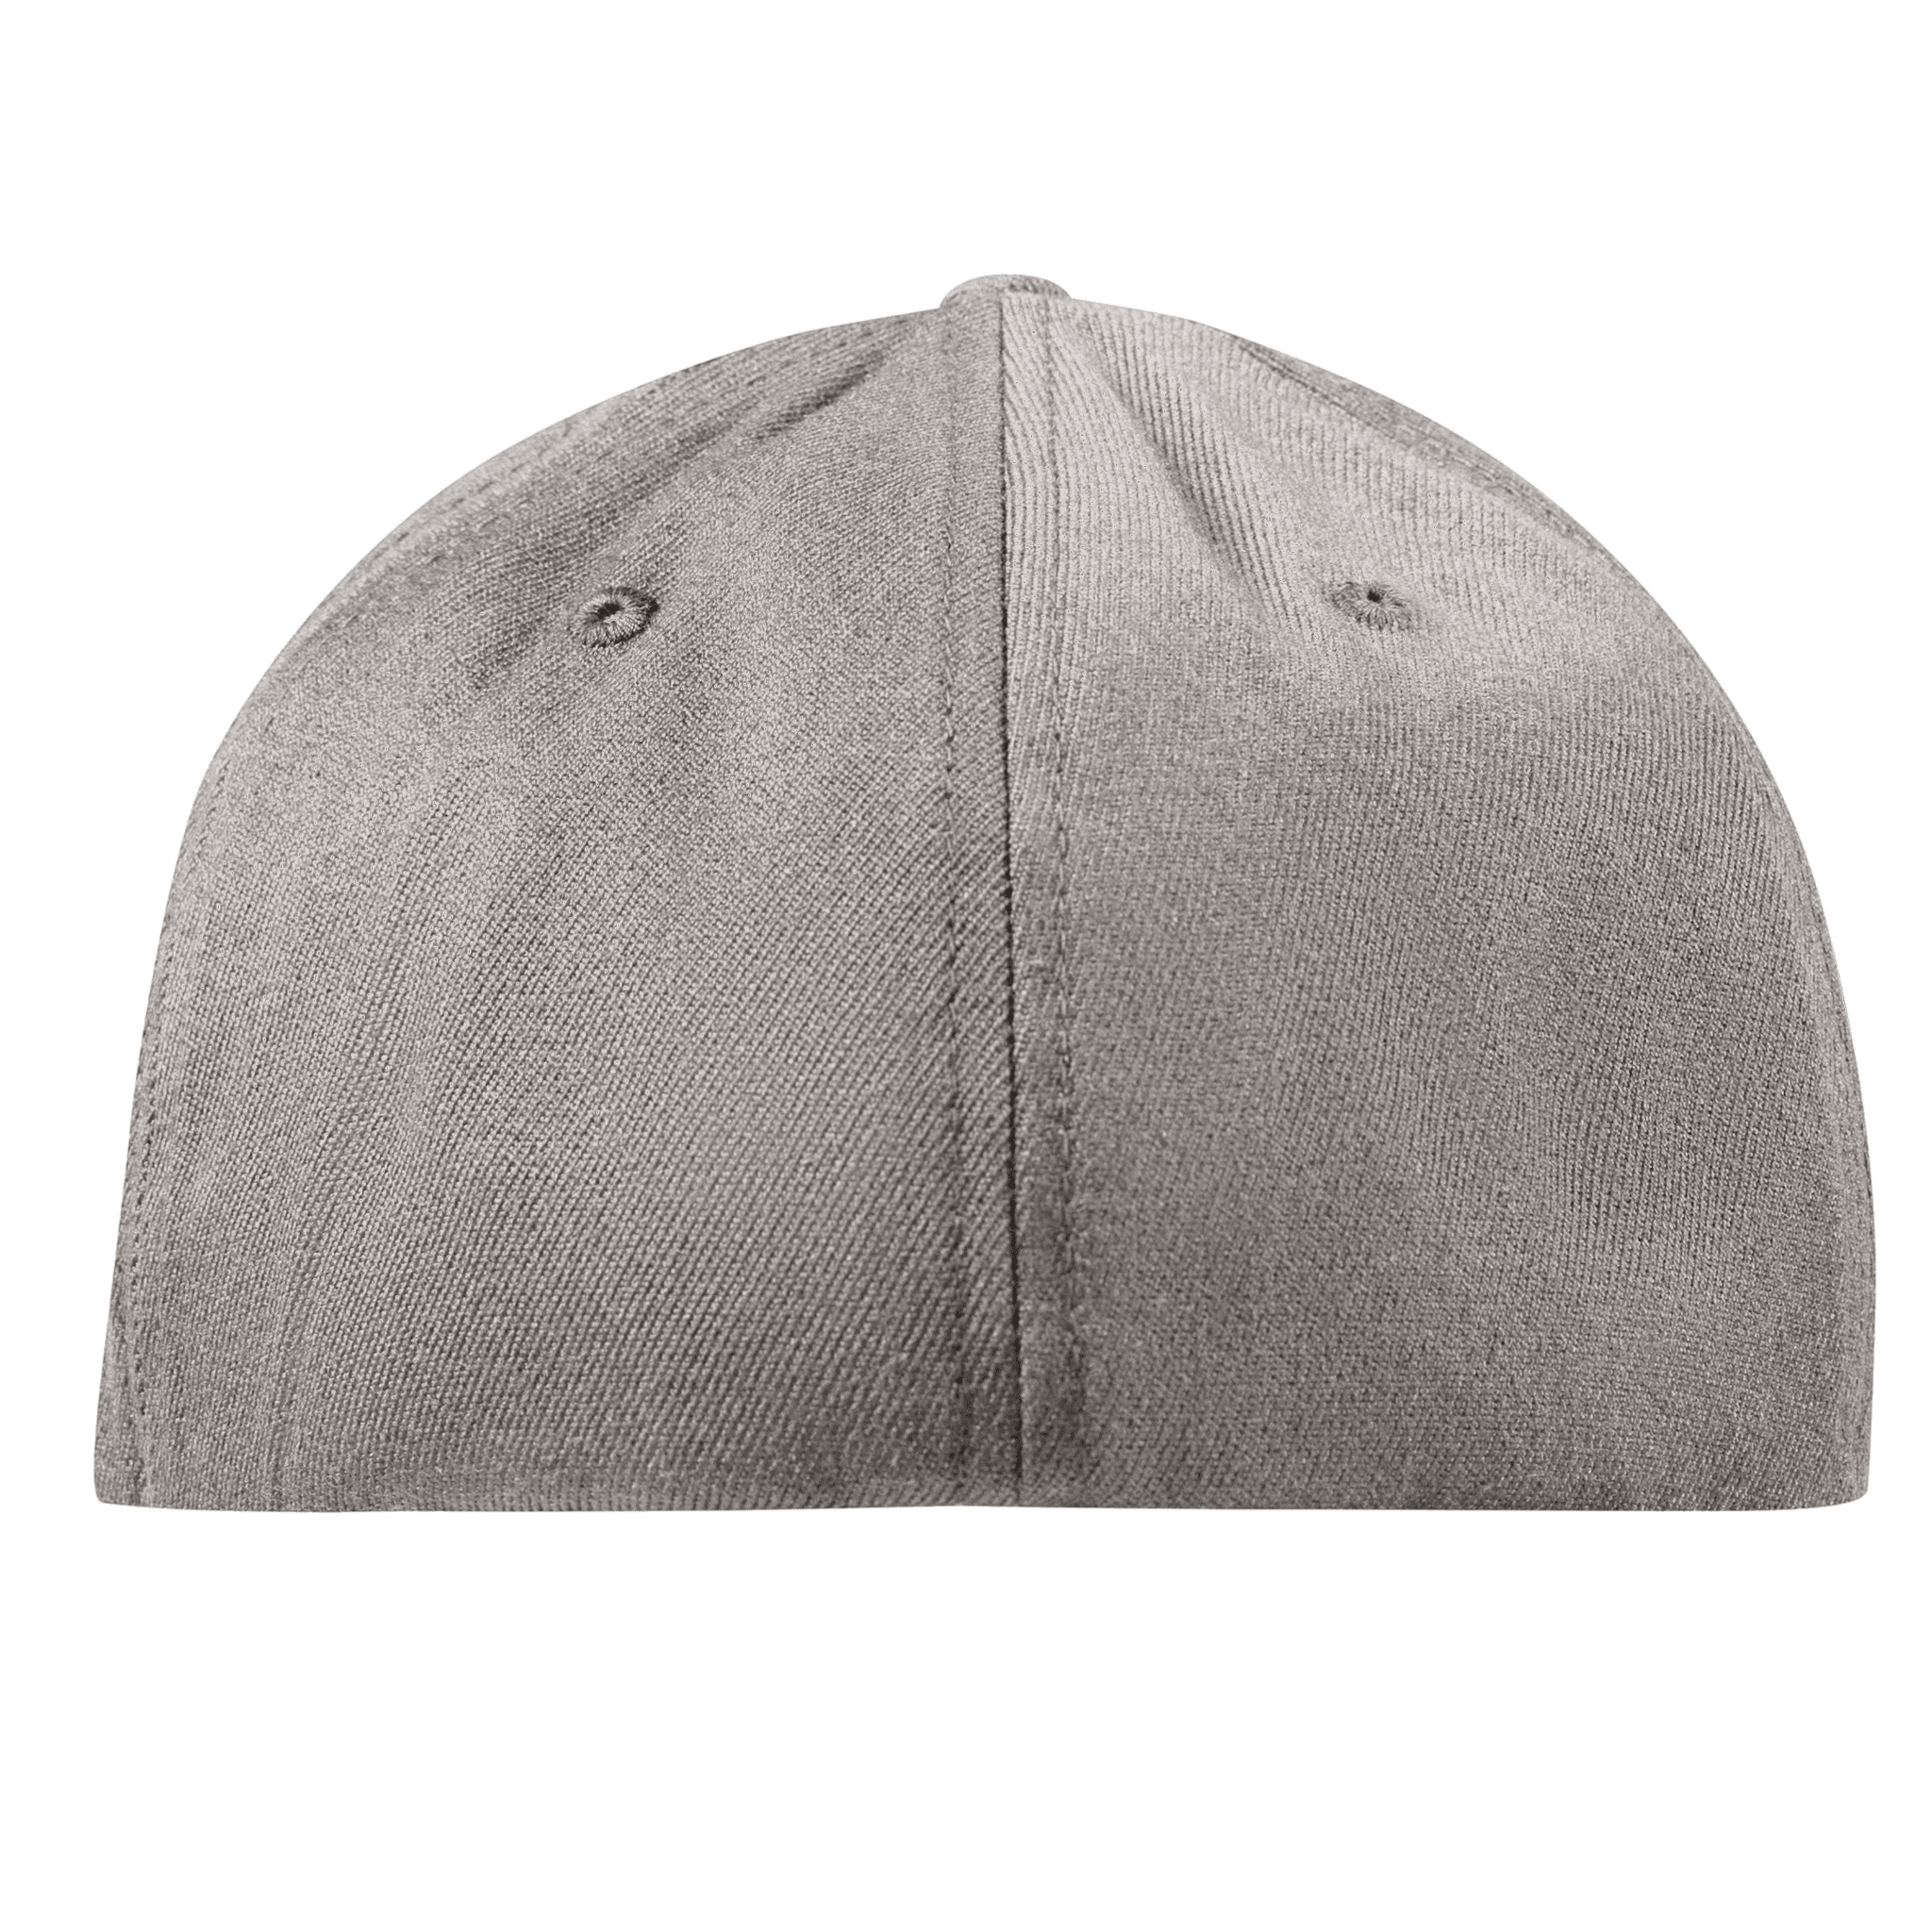 Wisconsin Vintage Flexfit Fitted Back Heather Grey